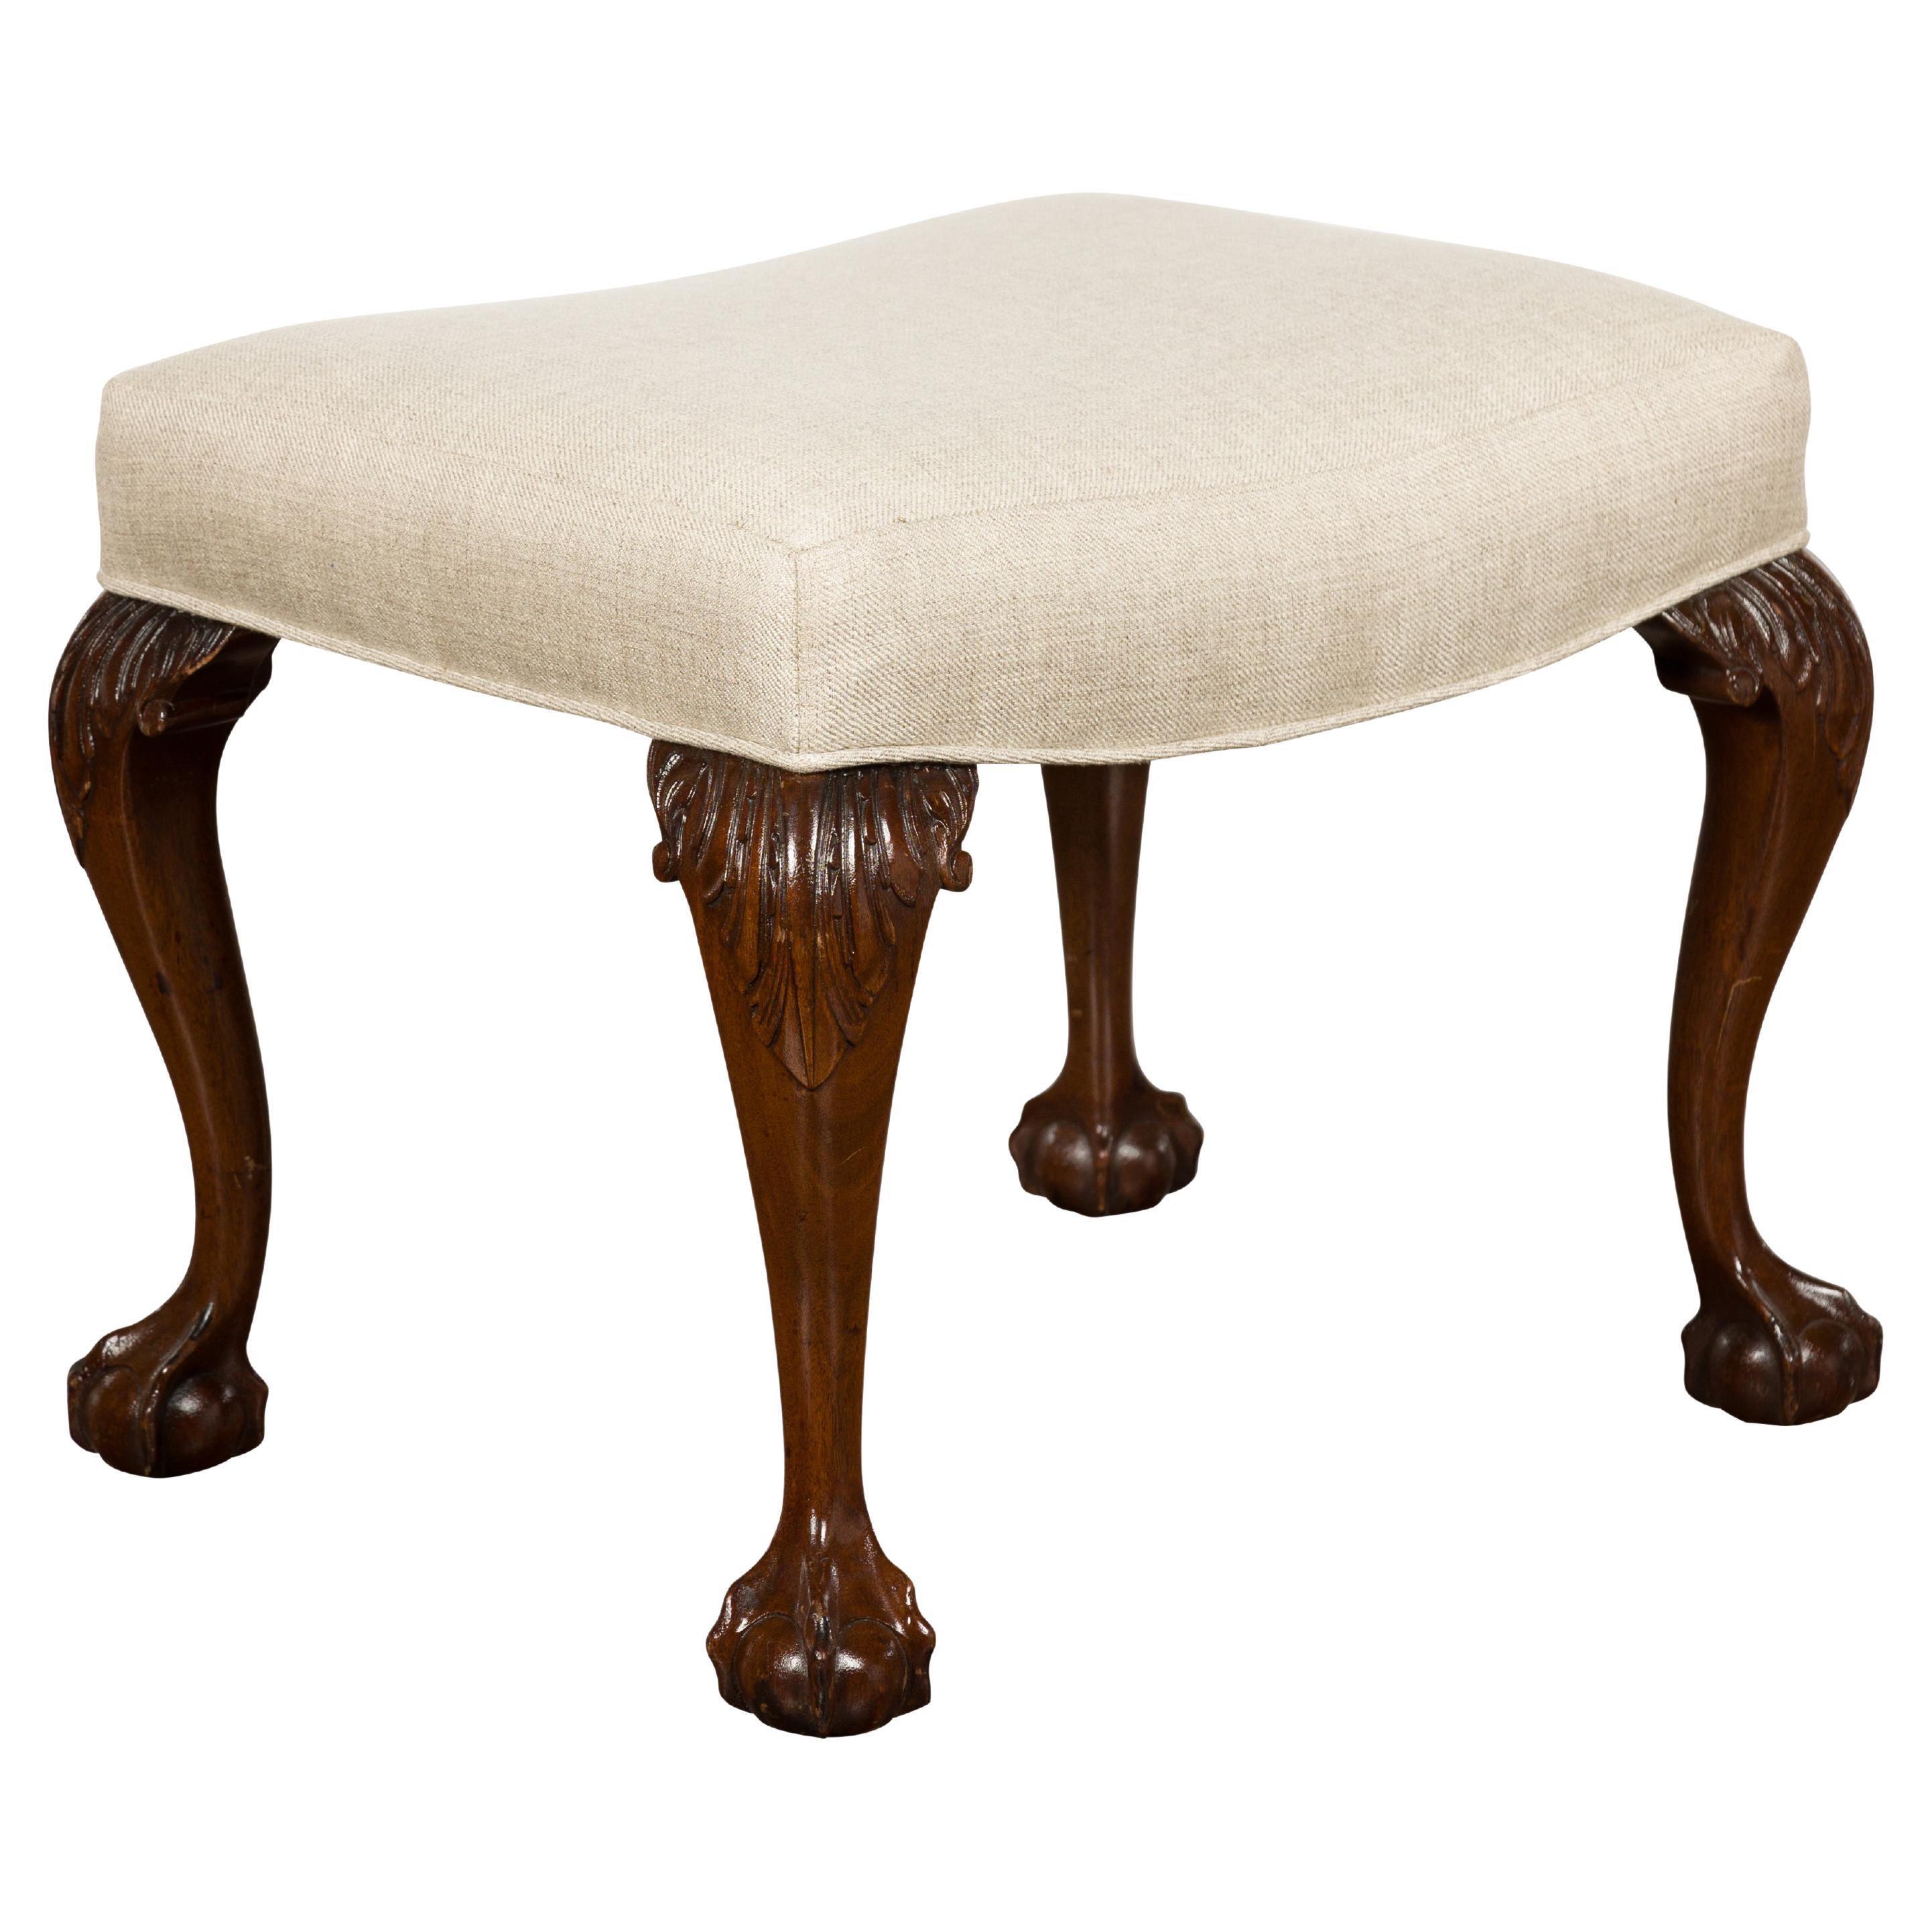 19th Century English Mahogany Upholstered Stool with Cabriole Legs